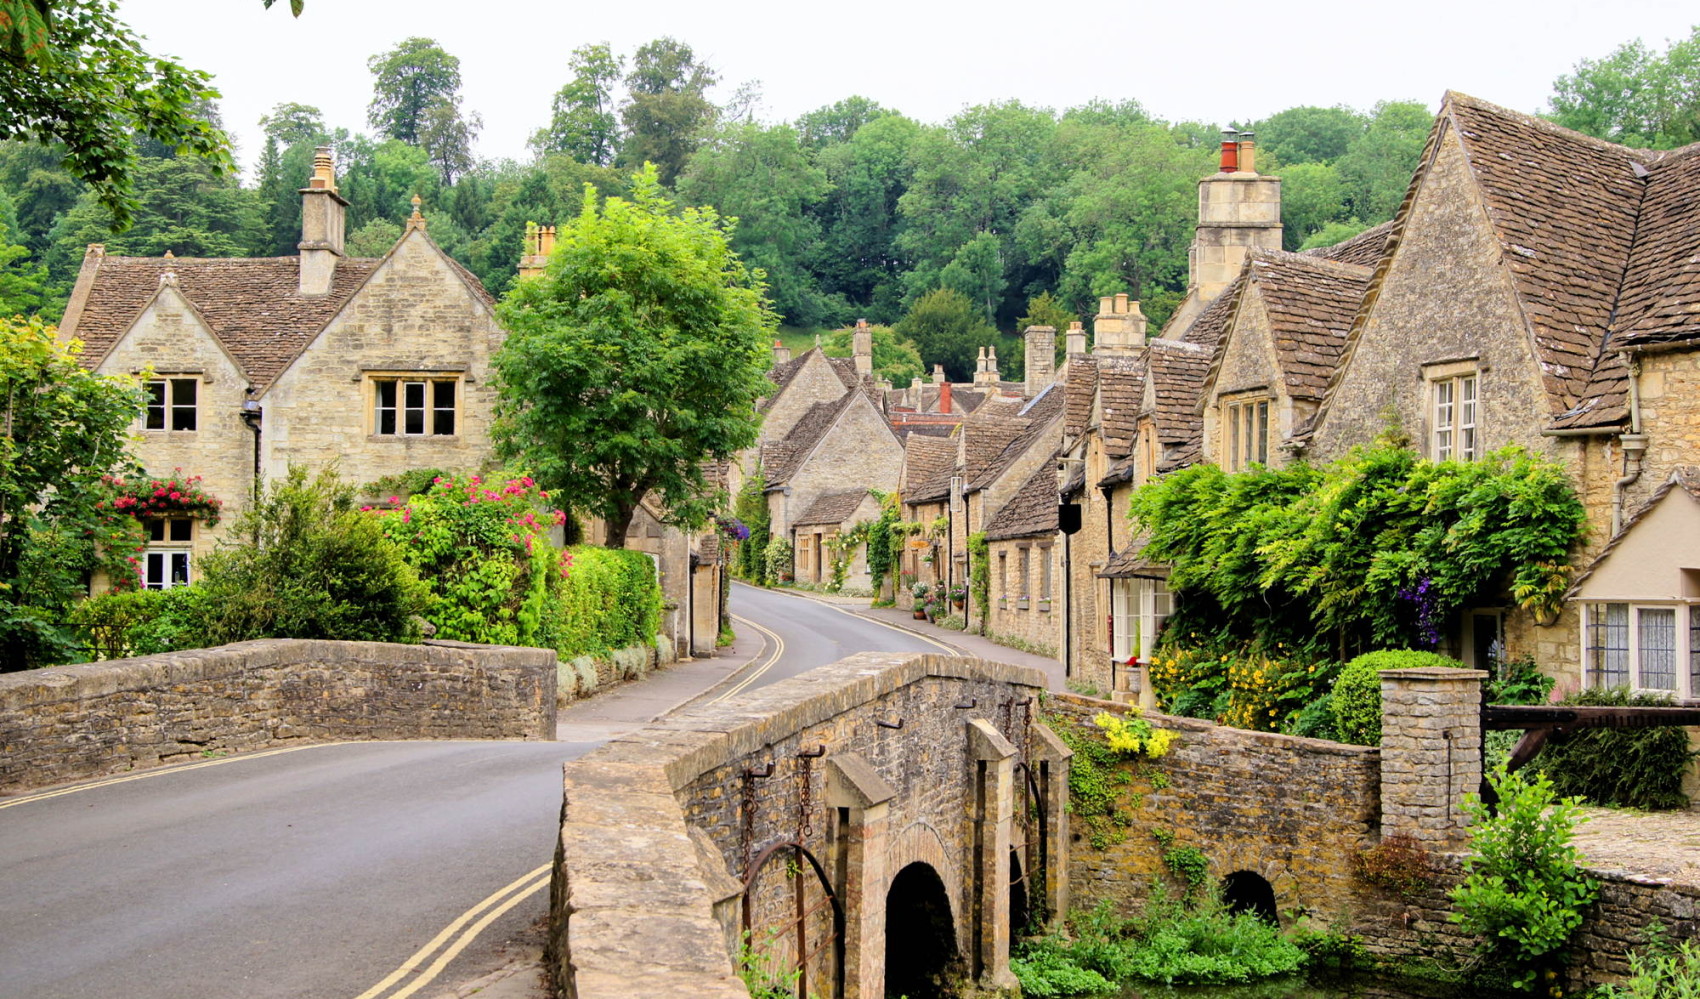 AONB cover 18% of the UK countryside and responsibility of care is assumed by local authorities and the rural community (Photo: Cotswolds)